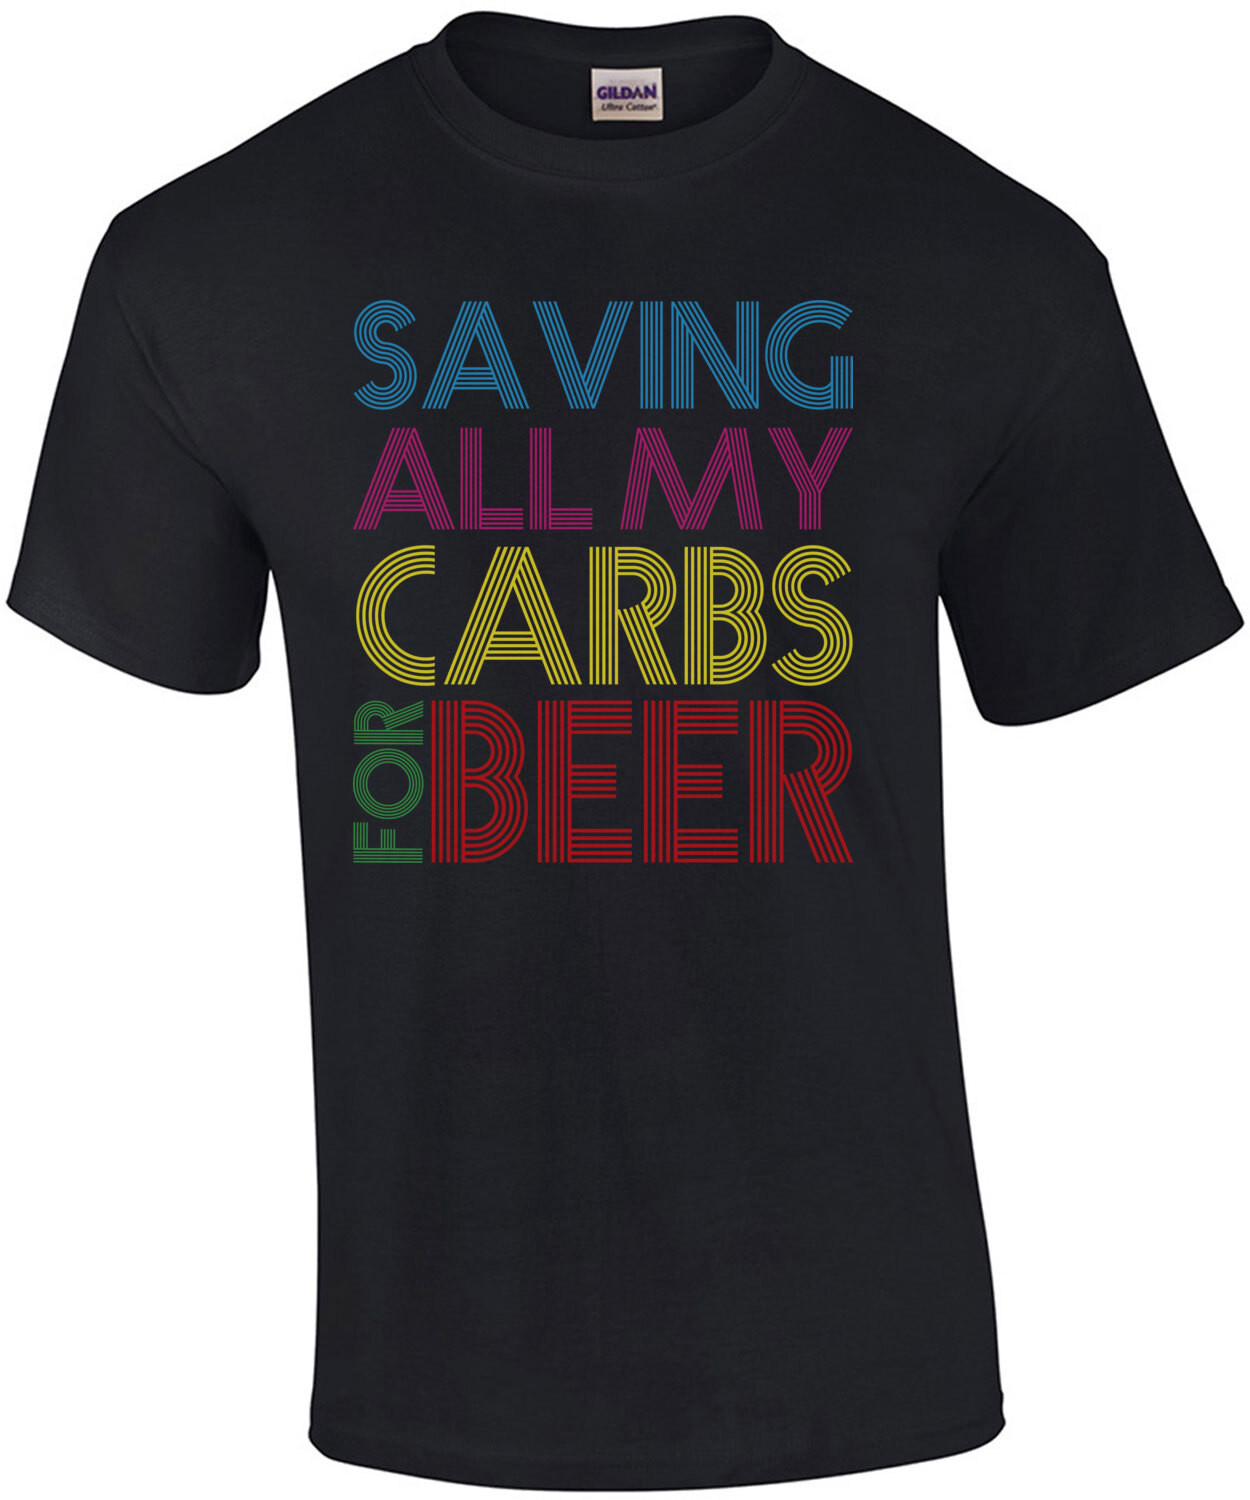 Saving all my carbs for beer - funny beer drinking t-shirt